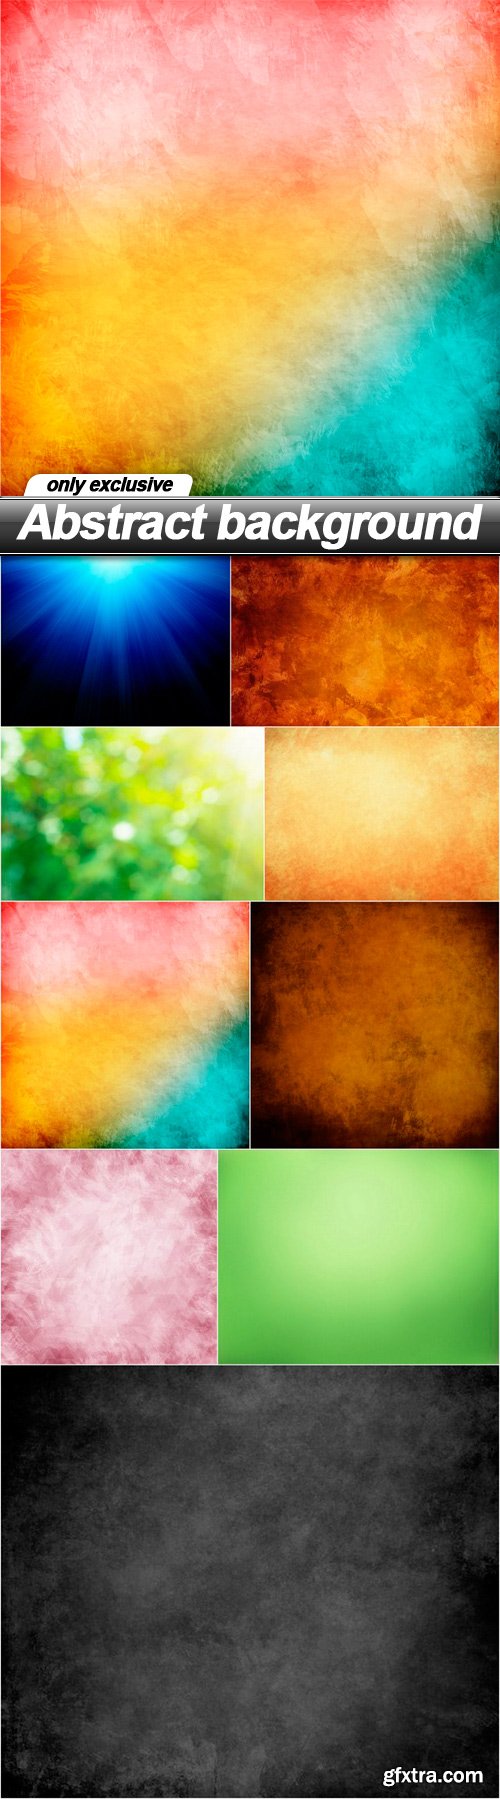 Abstract background - 10 UHQ JPEG